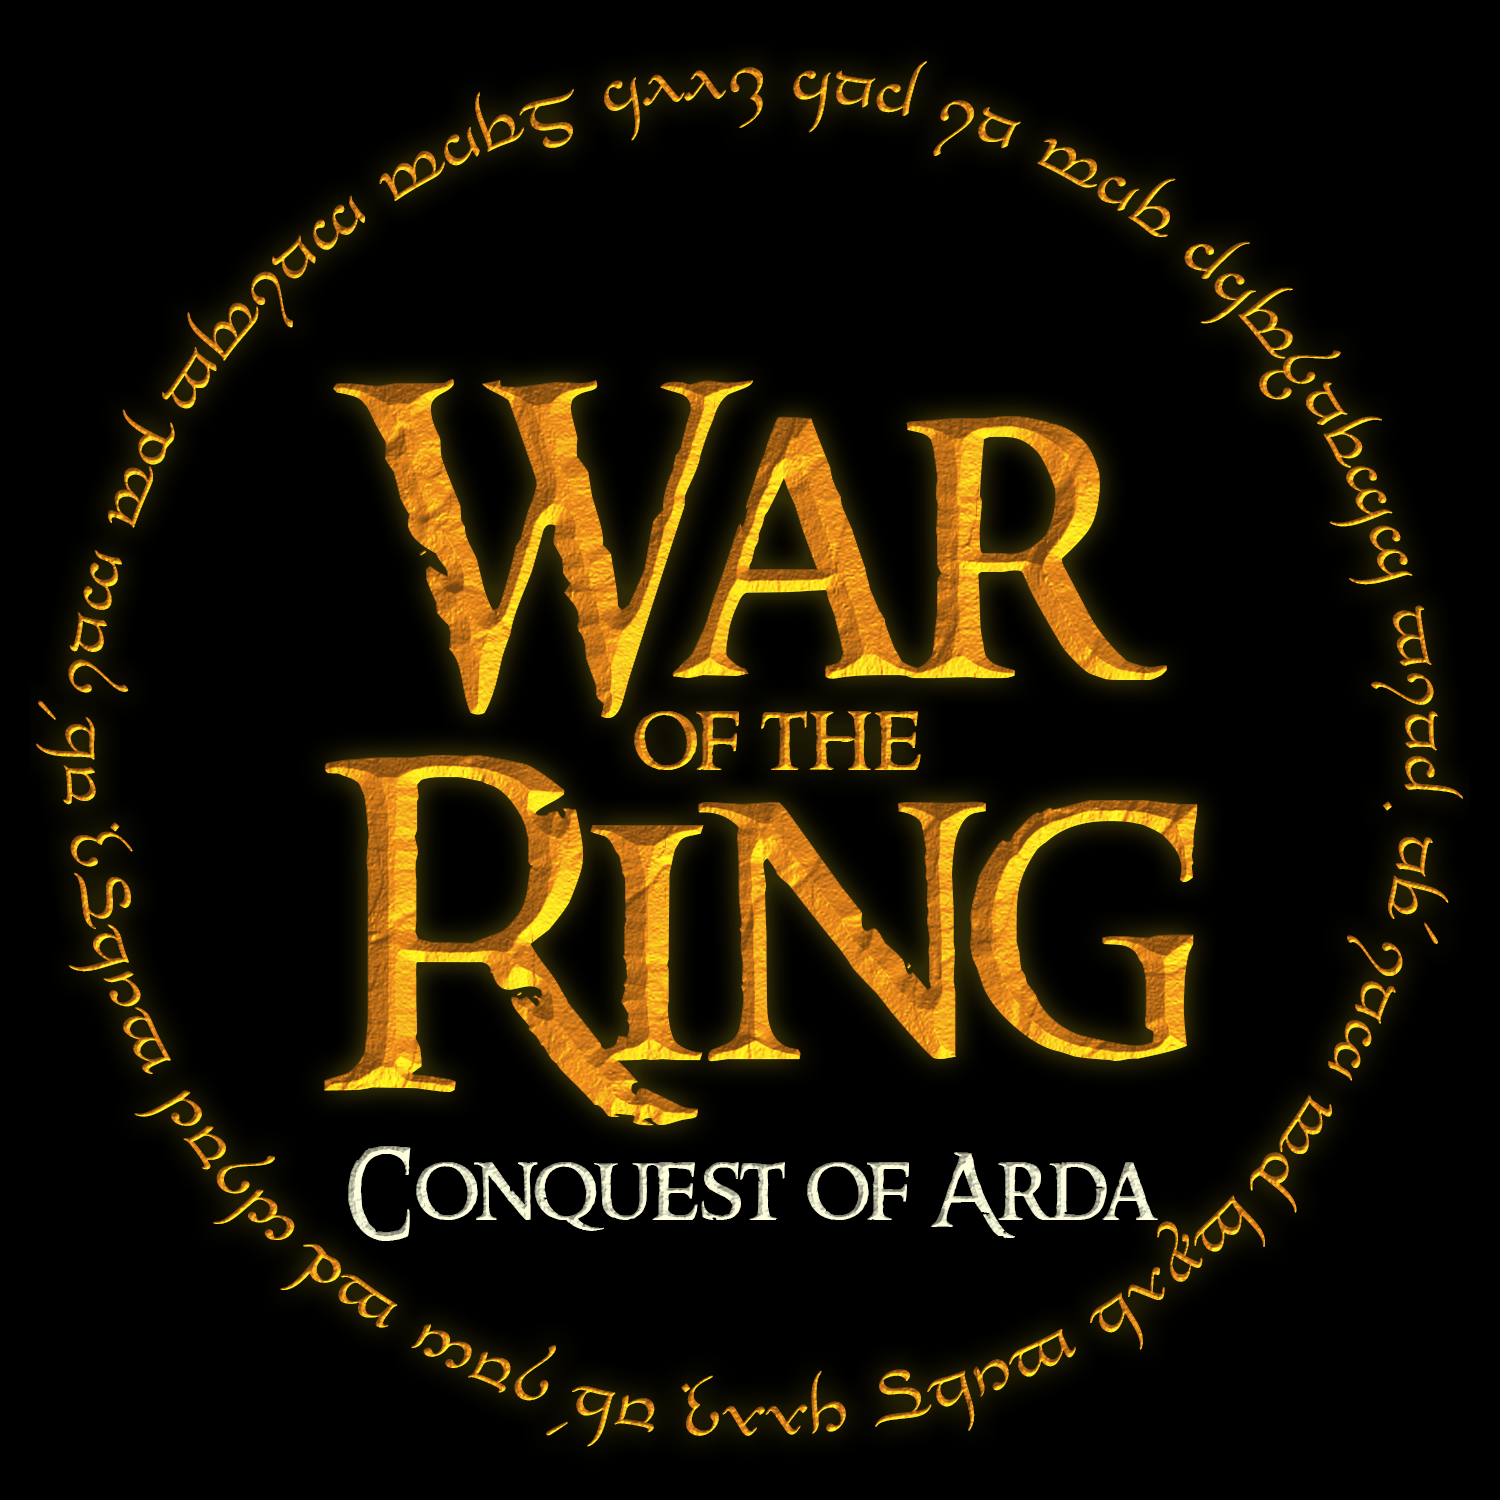 Middle-earth Gameplay Guide, The Lord of the Rings Minecraft Mod Wiki